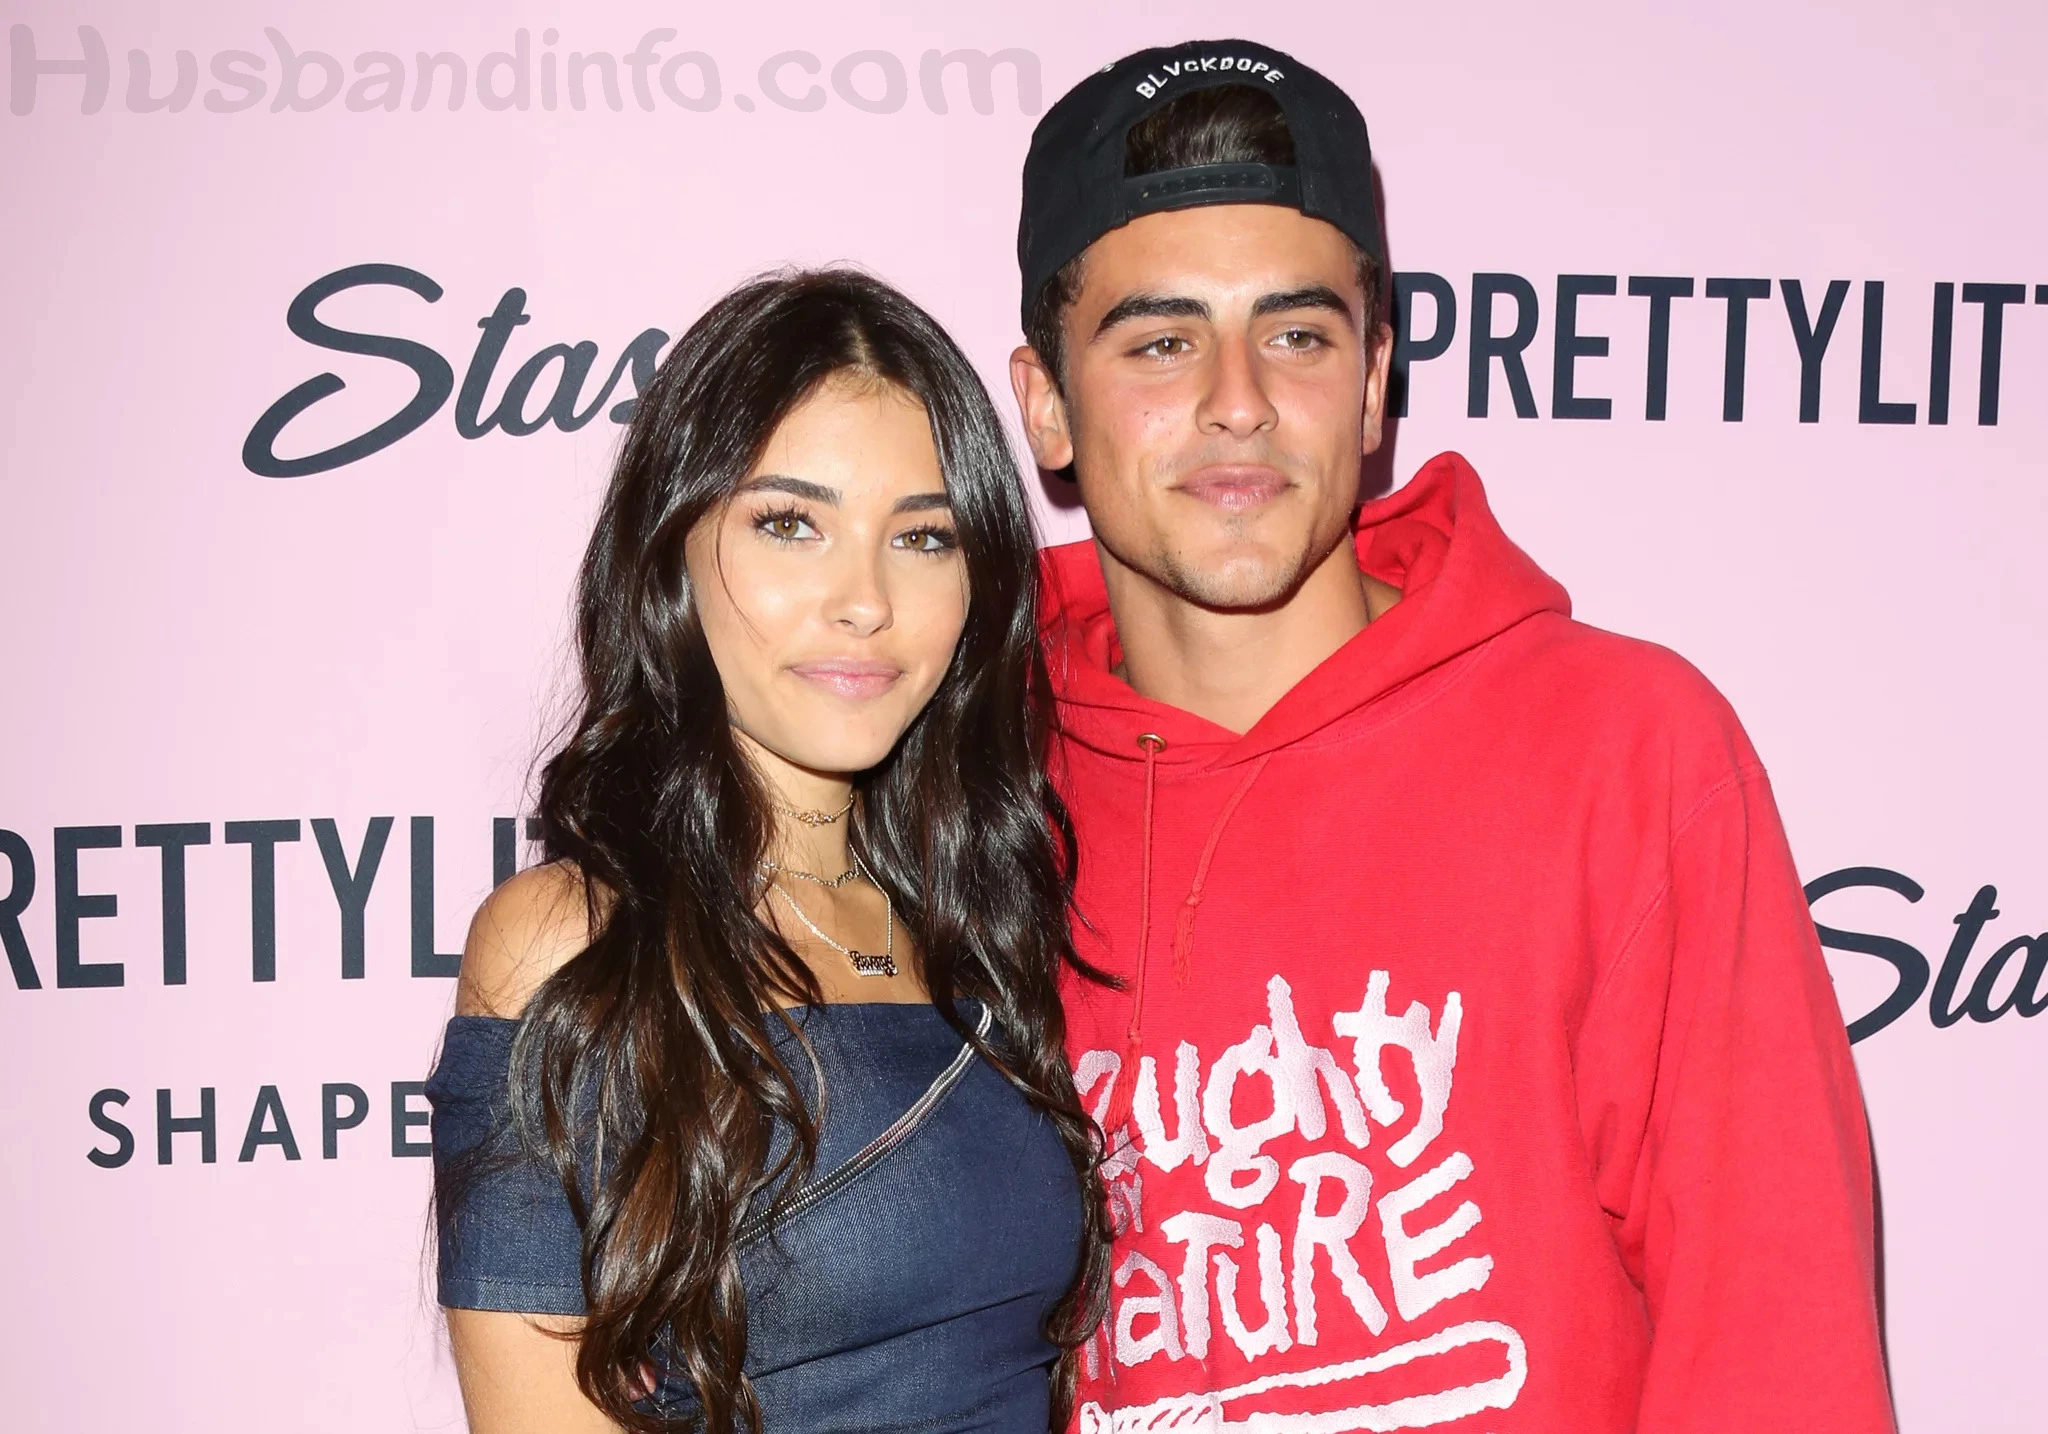 Madison Beer Husband | Wiki | Age | Height & Net Worth